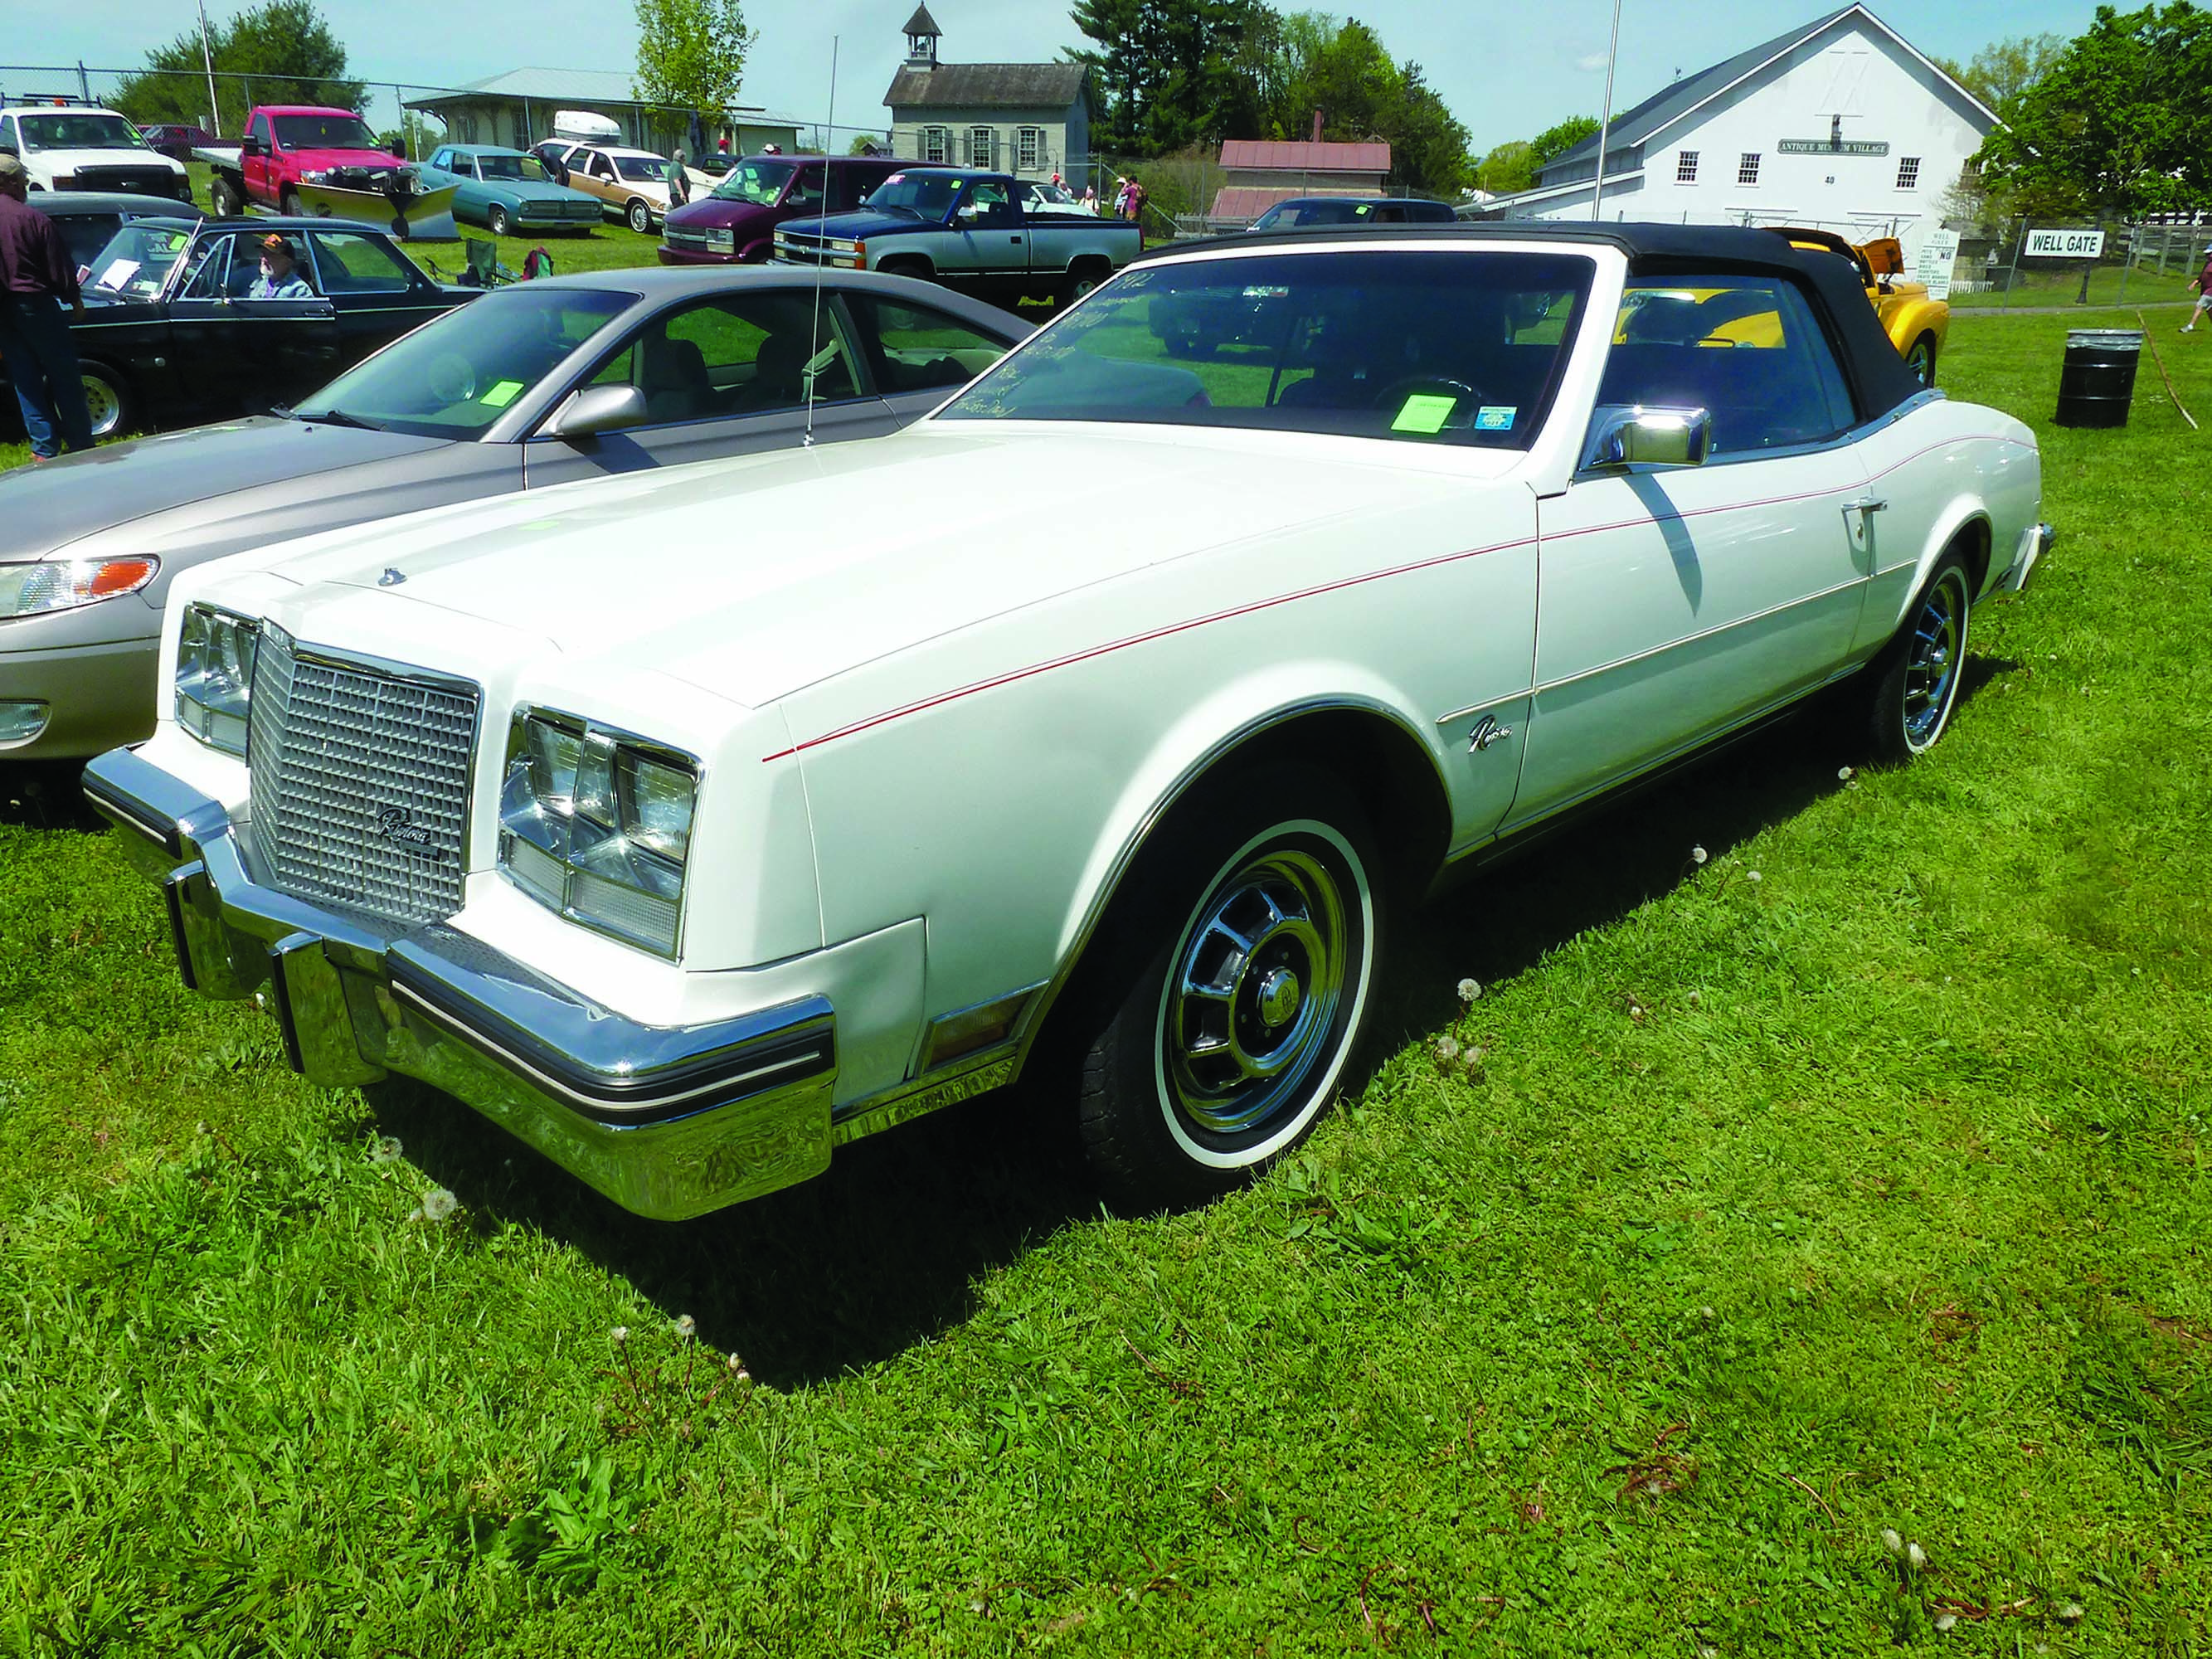 The 1982 Buick Riviera Was America's First Drop-Top Of The 1980s